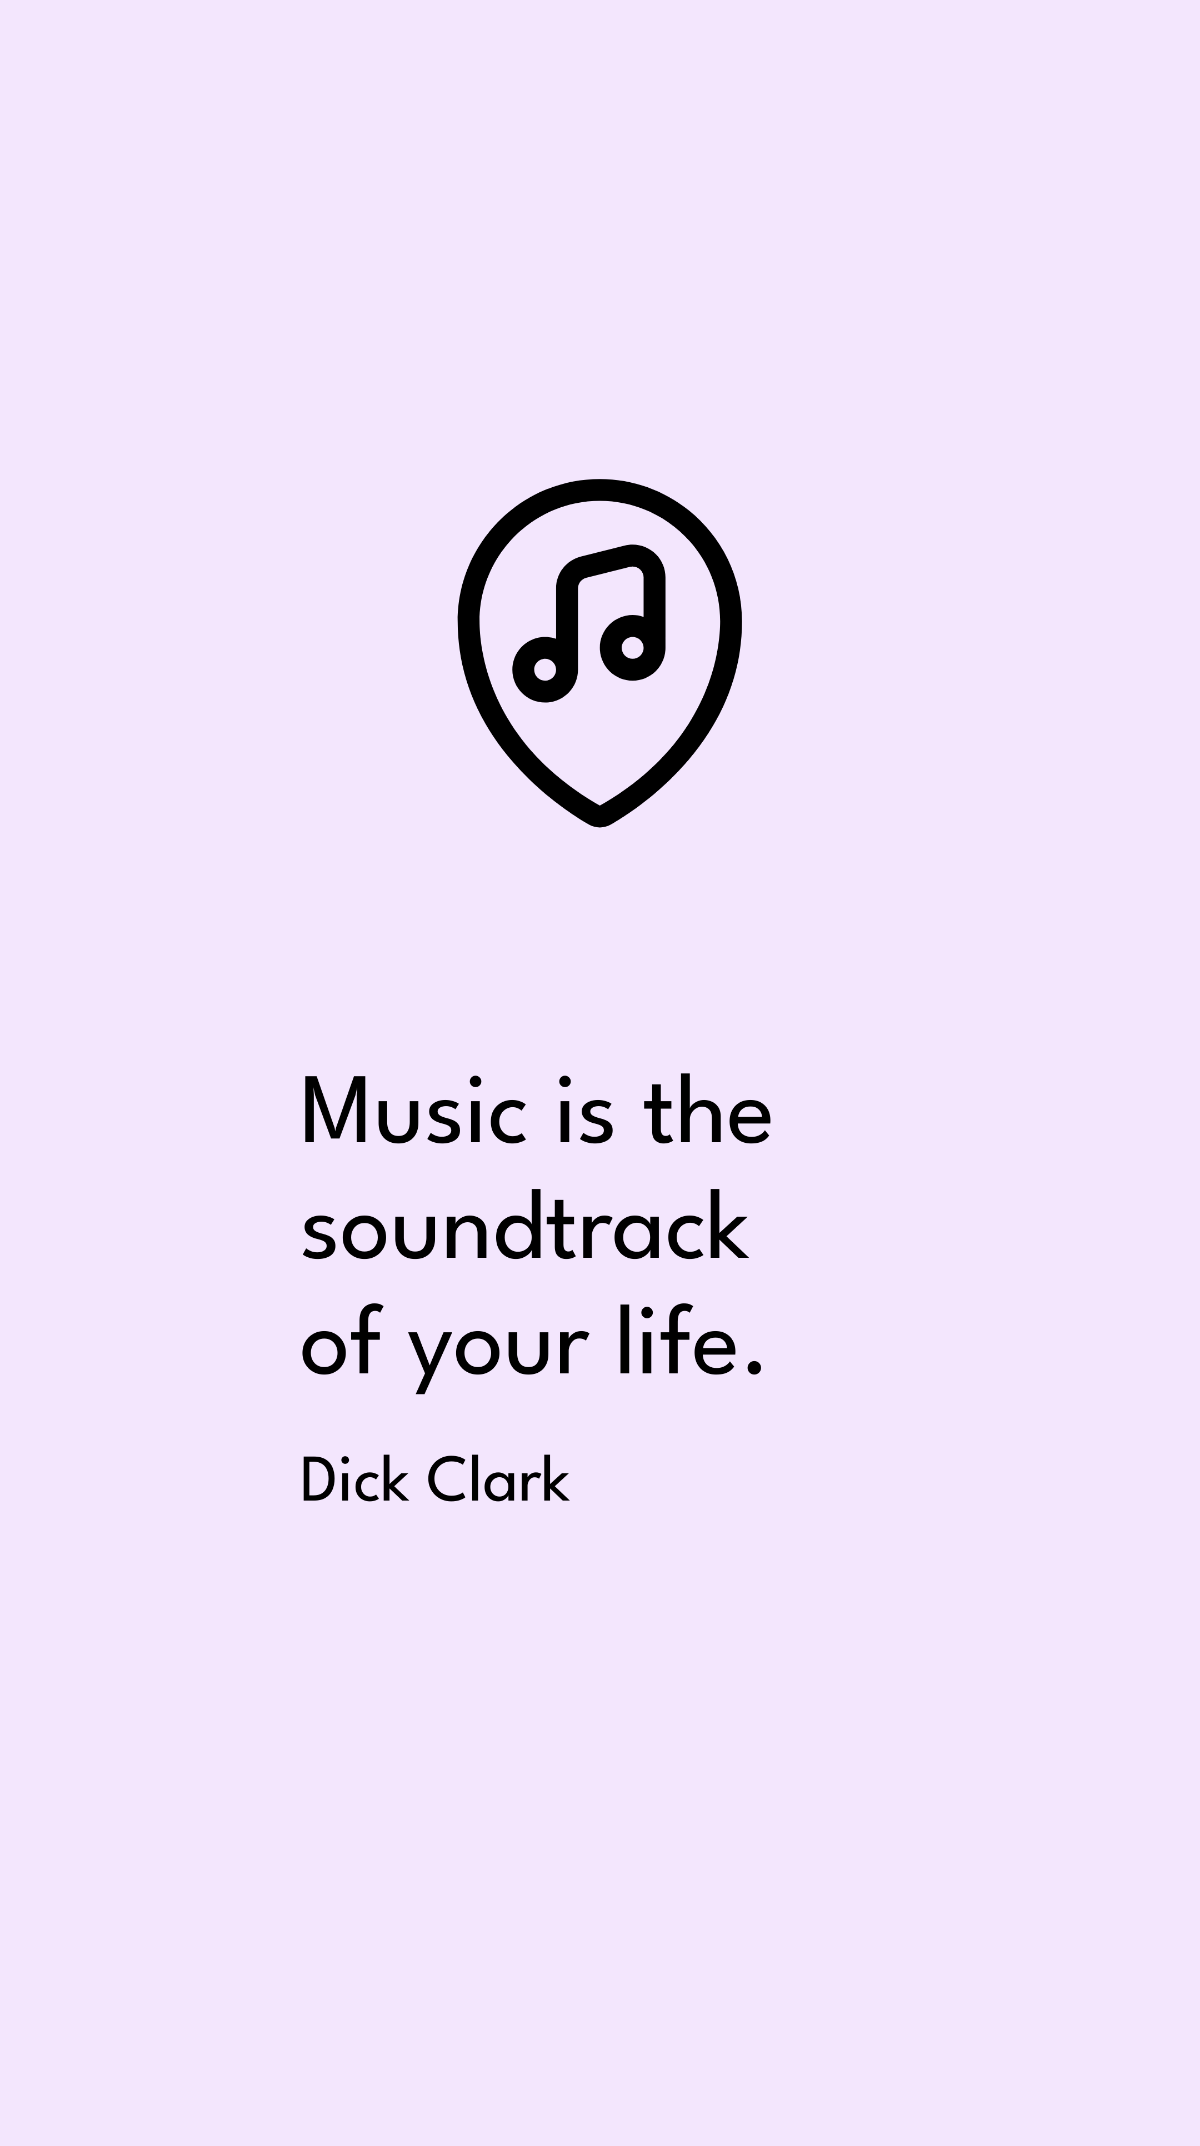 Dick Clark - Music is the soundtrack of your life. Template